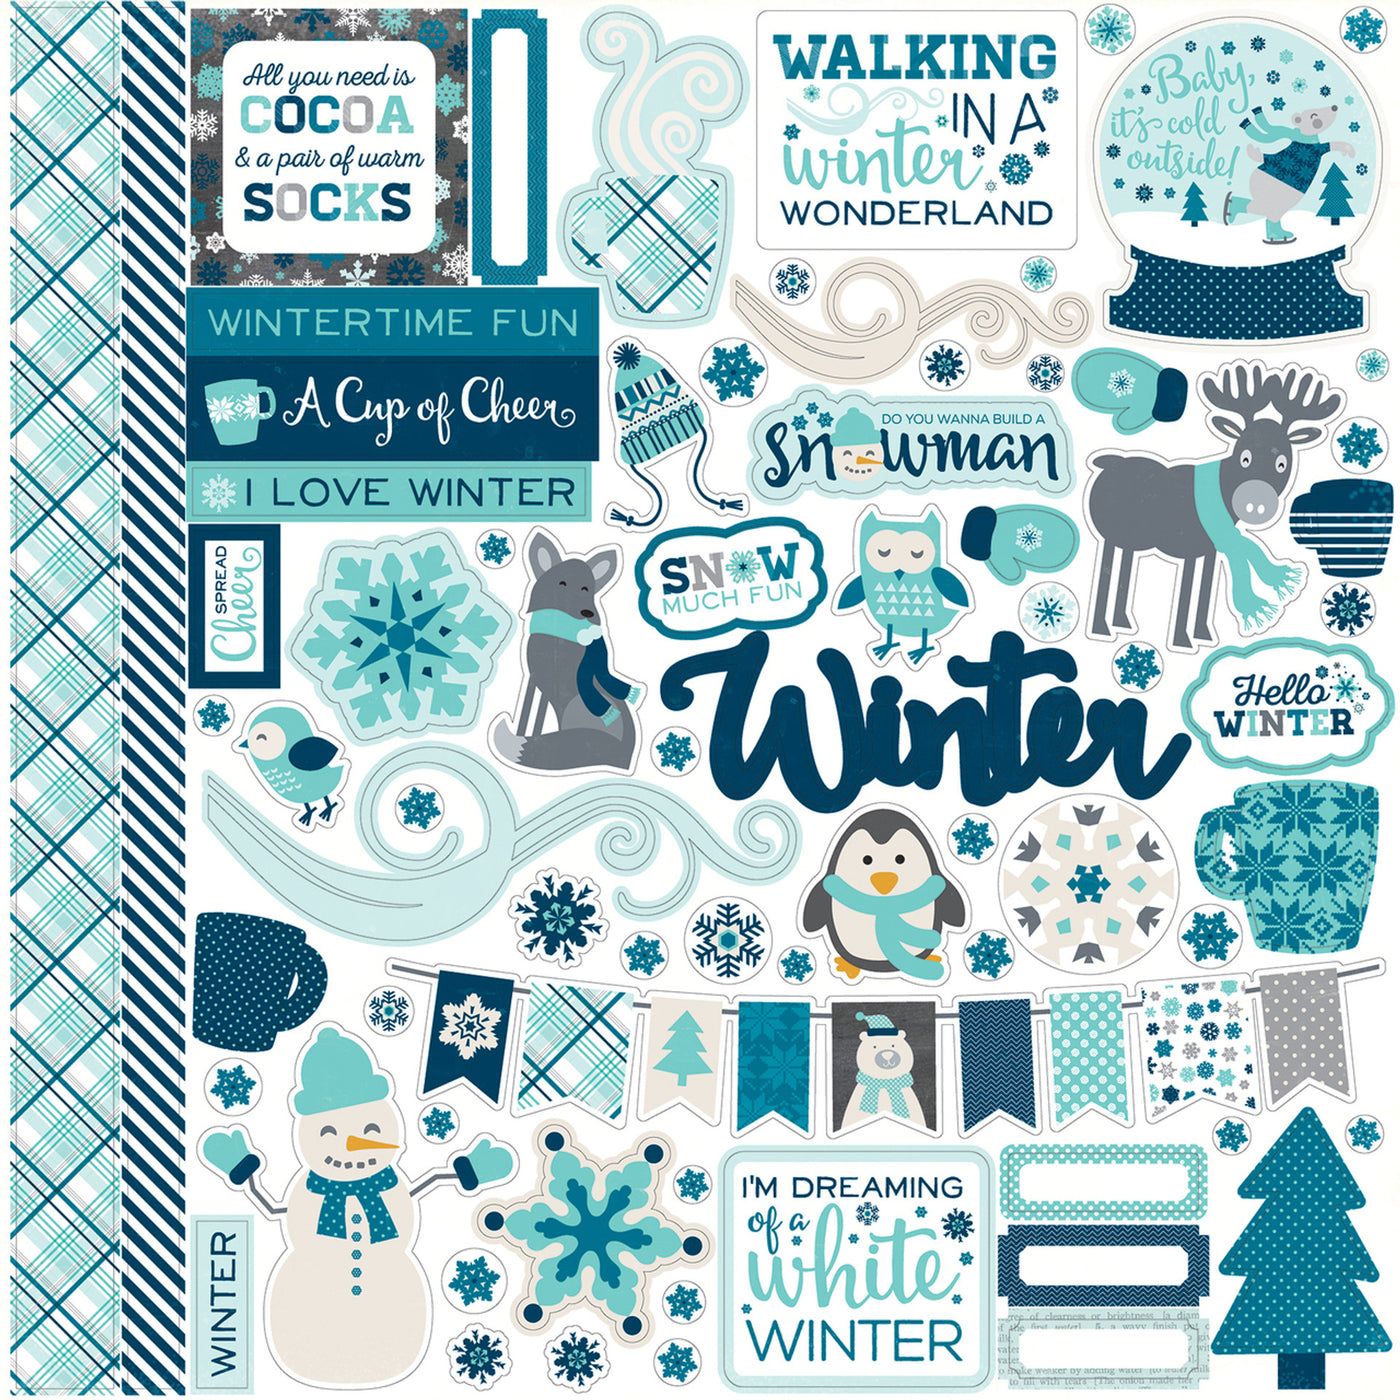 Hello Winter Elements 12" x 12" Cardstock Stickers from the Hello Winter Christmas Collection by Echo Park. These stickers include snowmen, penguins, snowflakes, cups of hot chocolate, phrases, banners, and more!